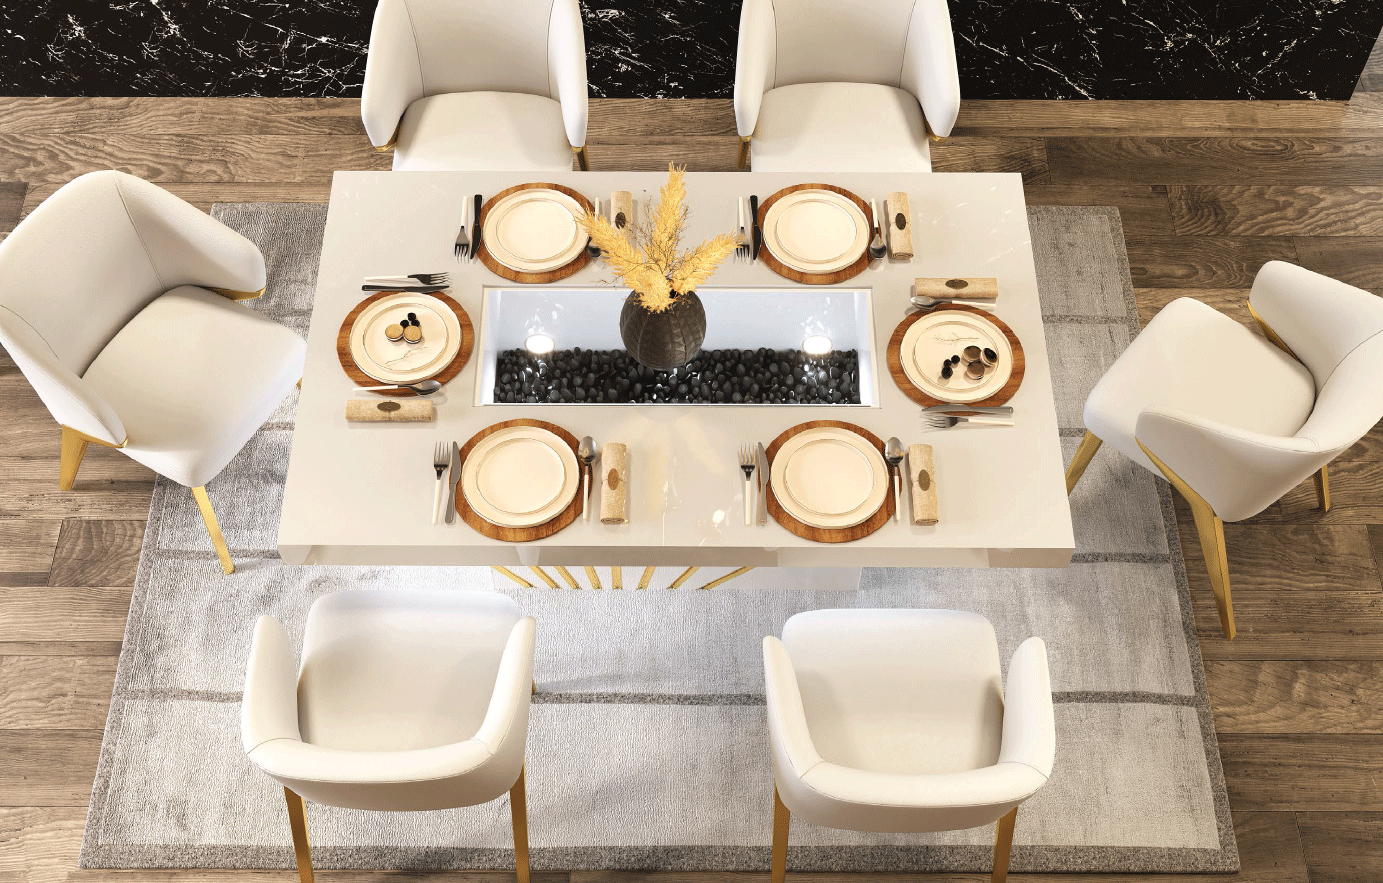 Dining Room Furniture Marble-Look Tables Oro White Dining room Additional Items